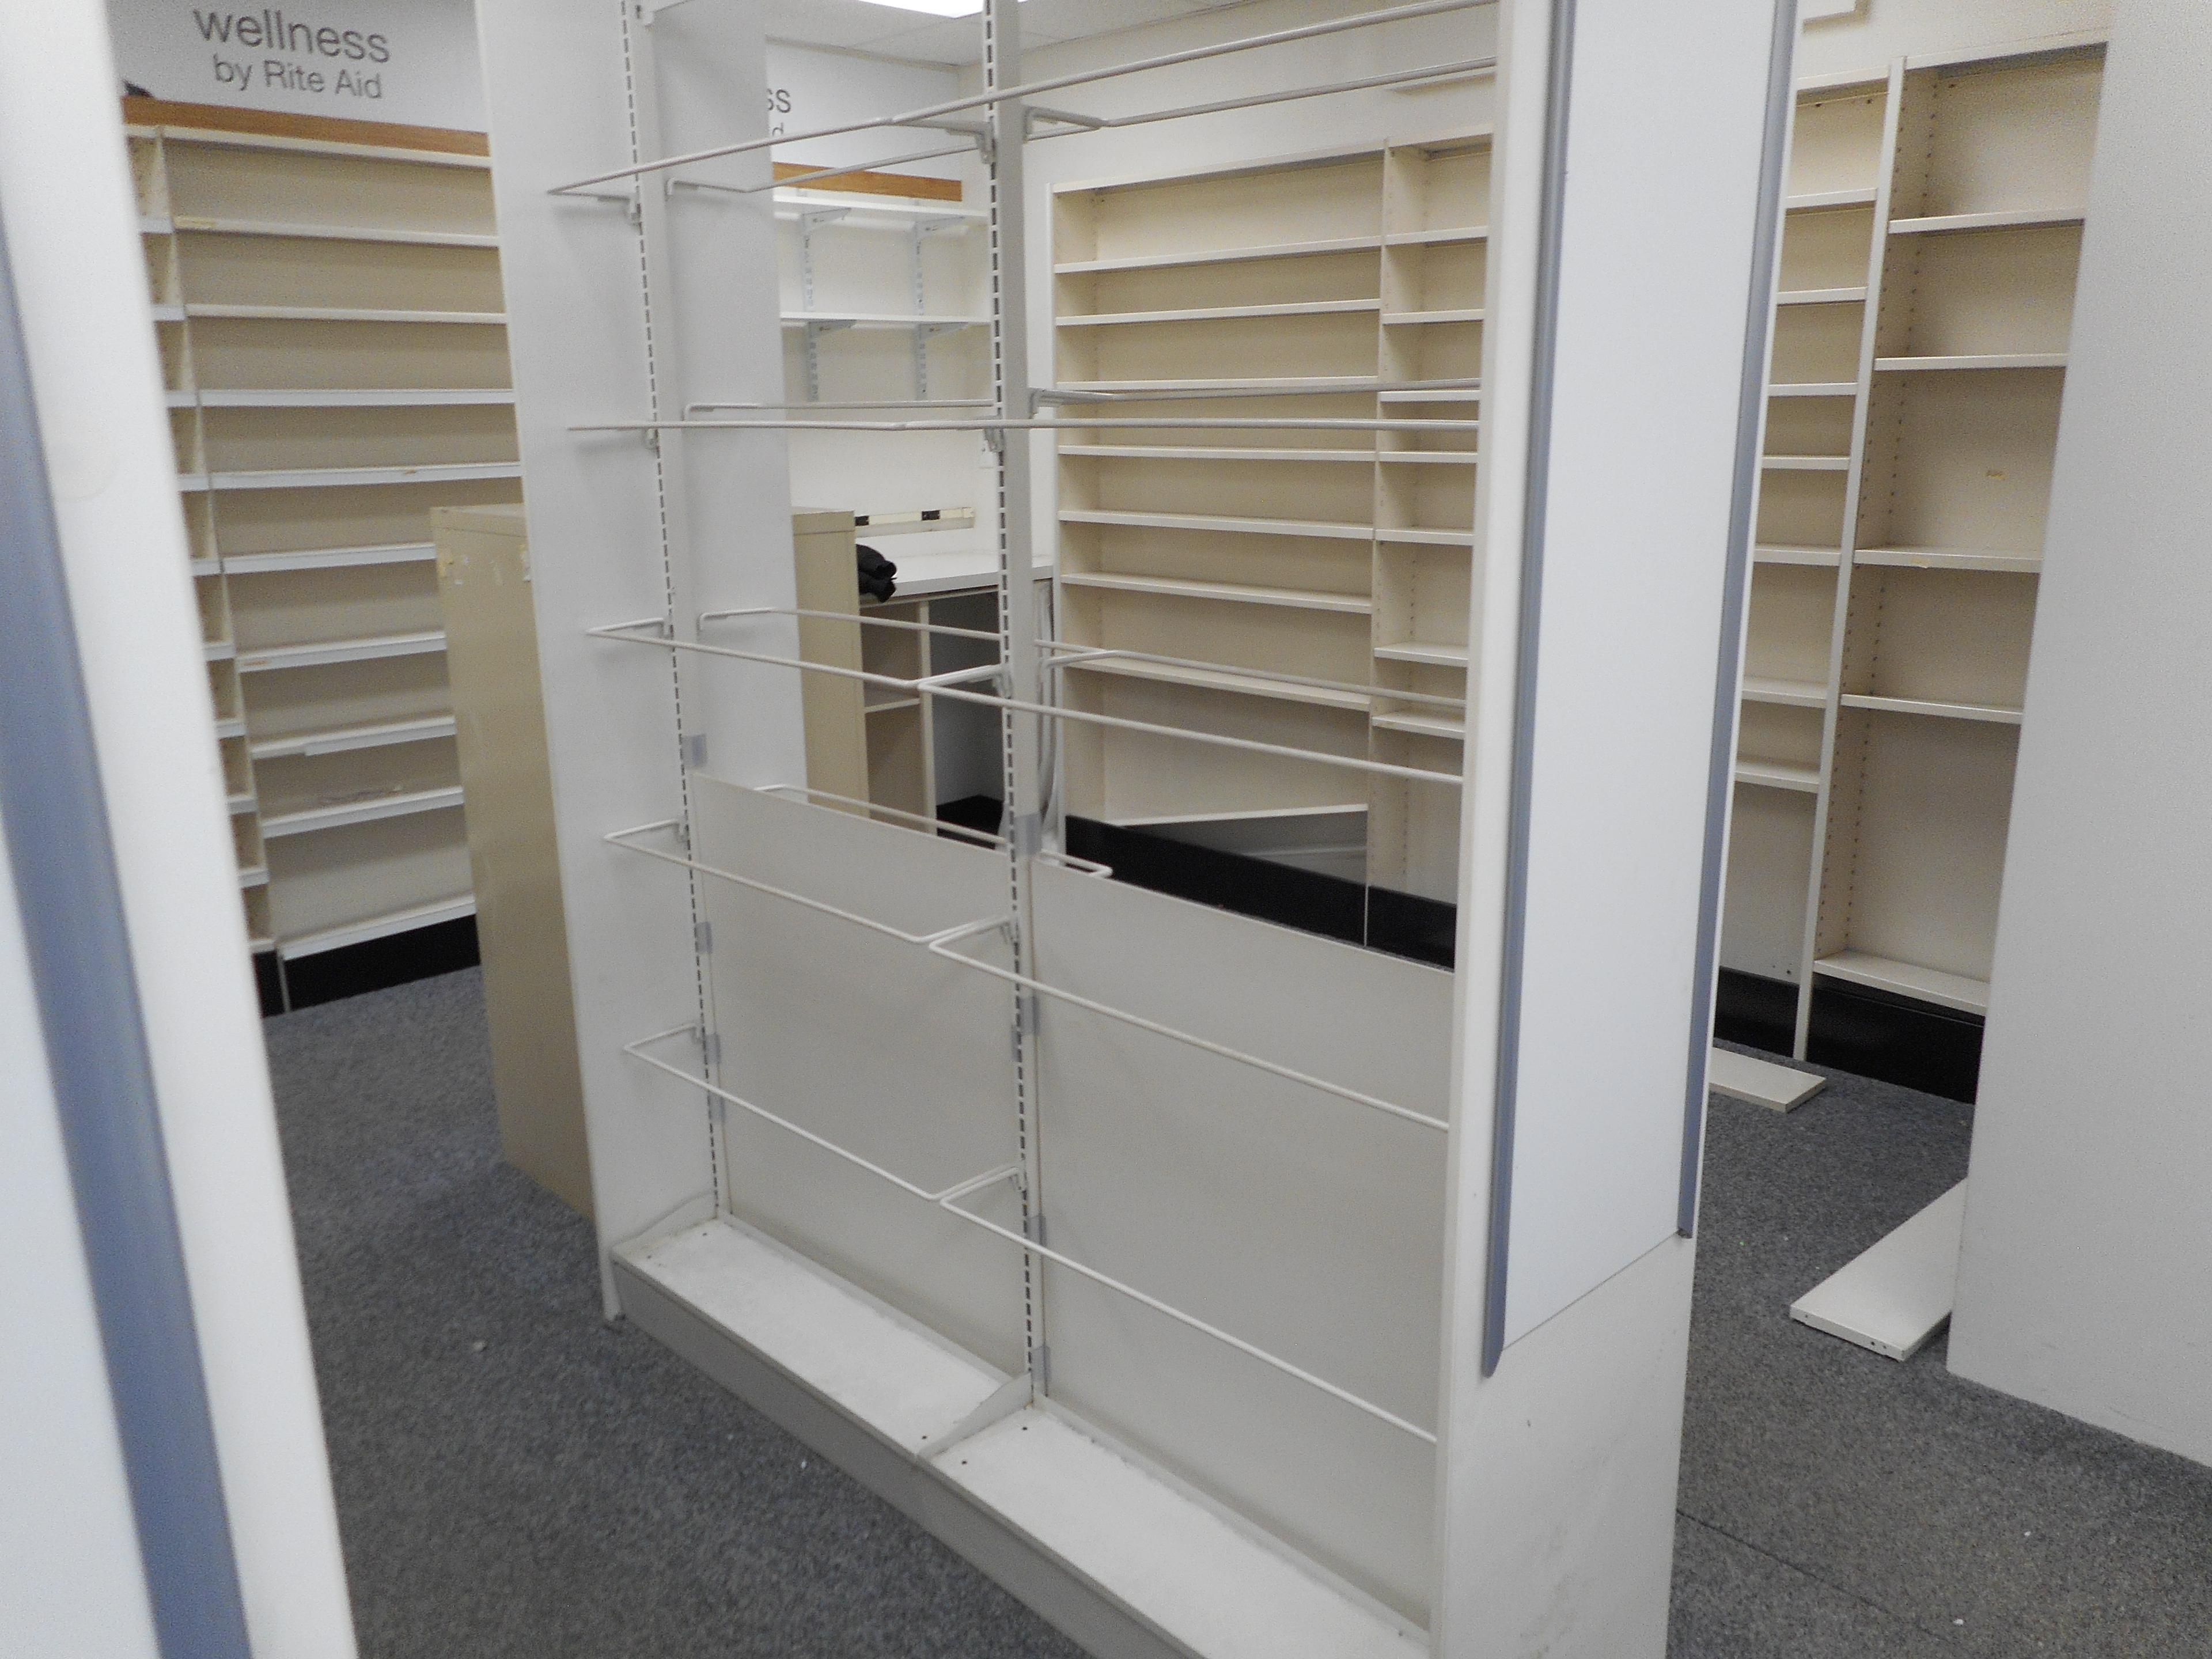 ALL PHARMACY SHELVING 8-2 SIDED SECTIONS AND 12 WALL SECTIONS